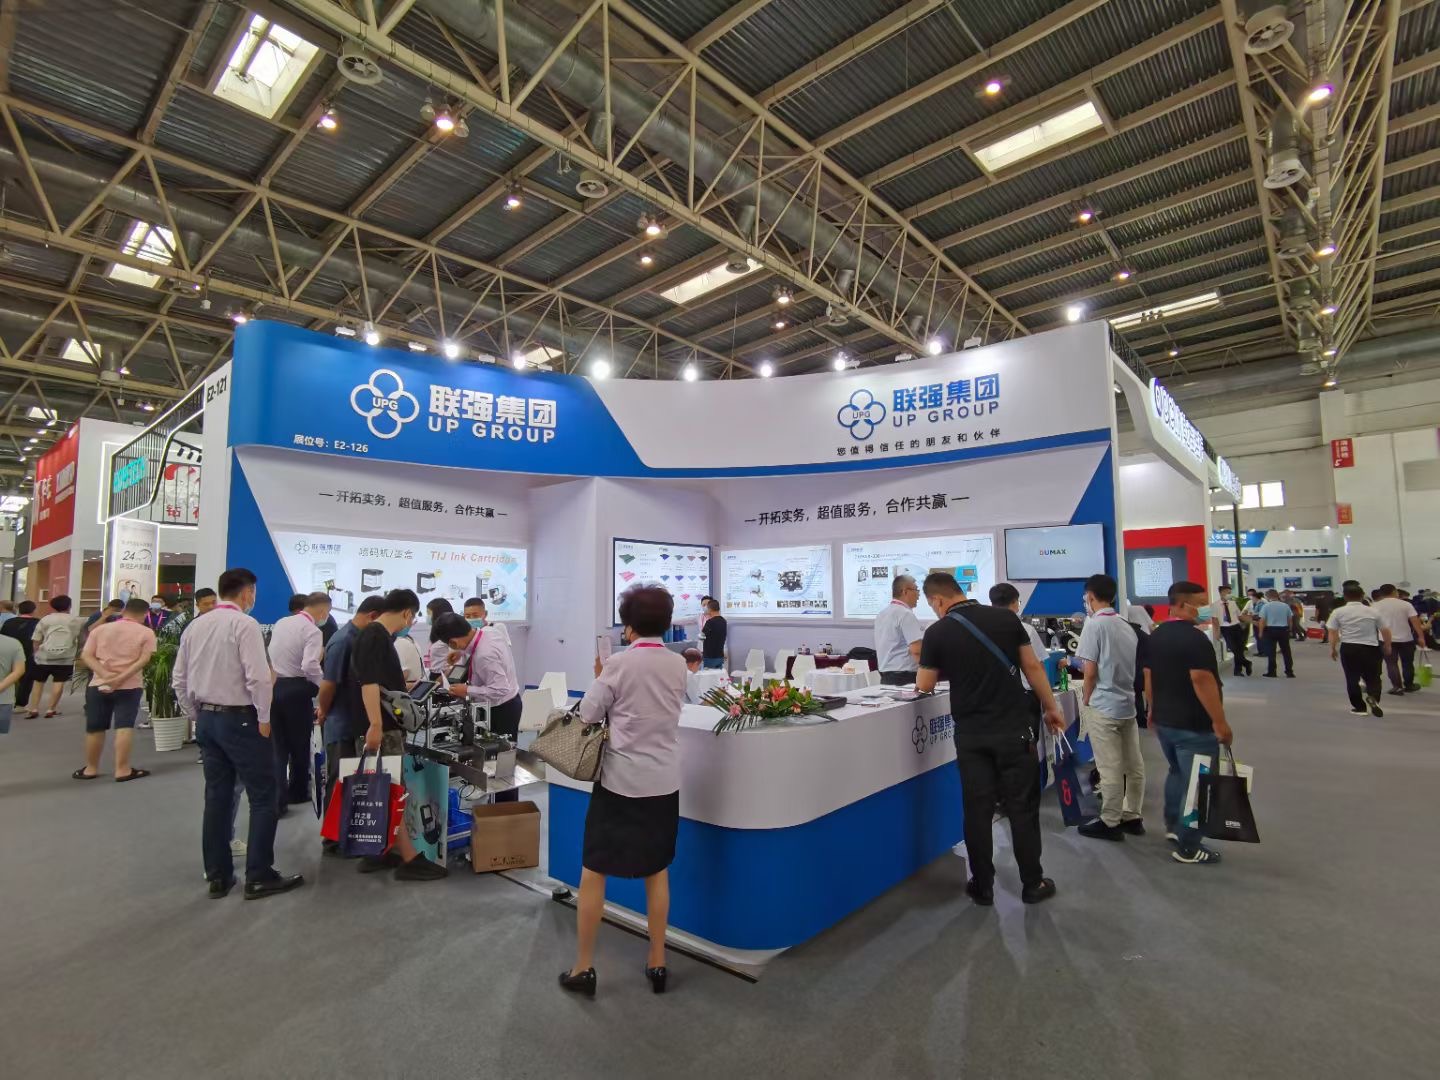 UP_Group_in_the_10th_Beijing_International_Printing_Technology_Exhibition.